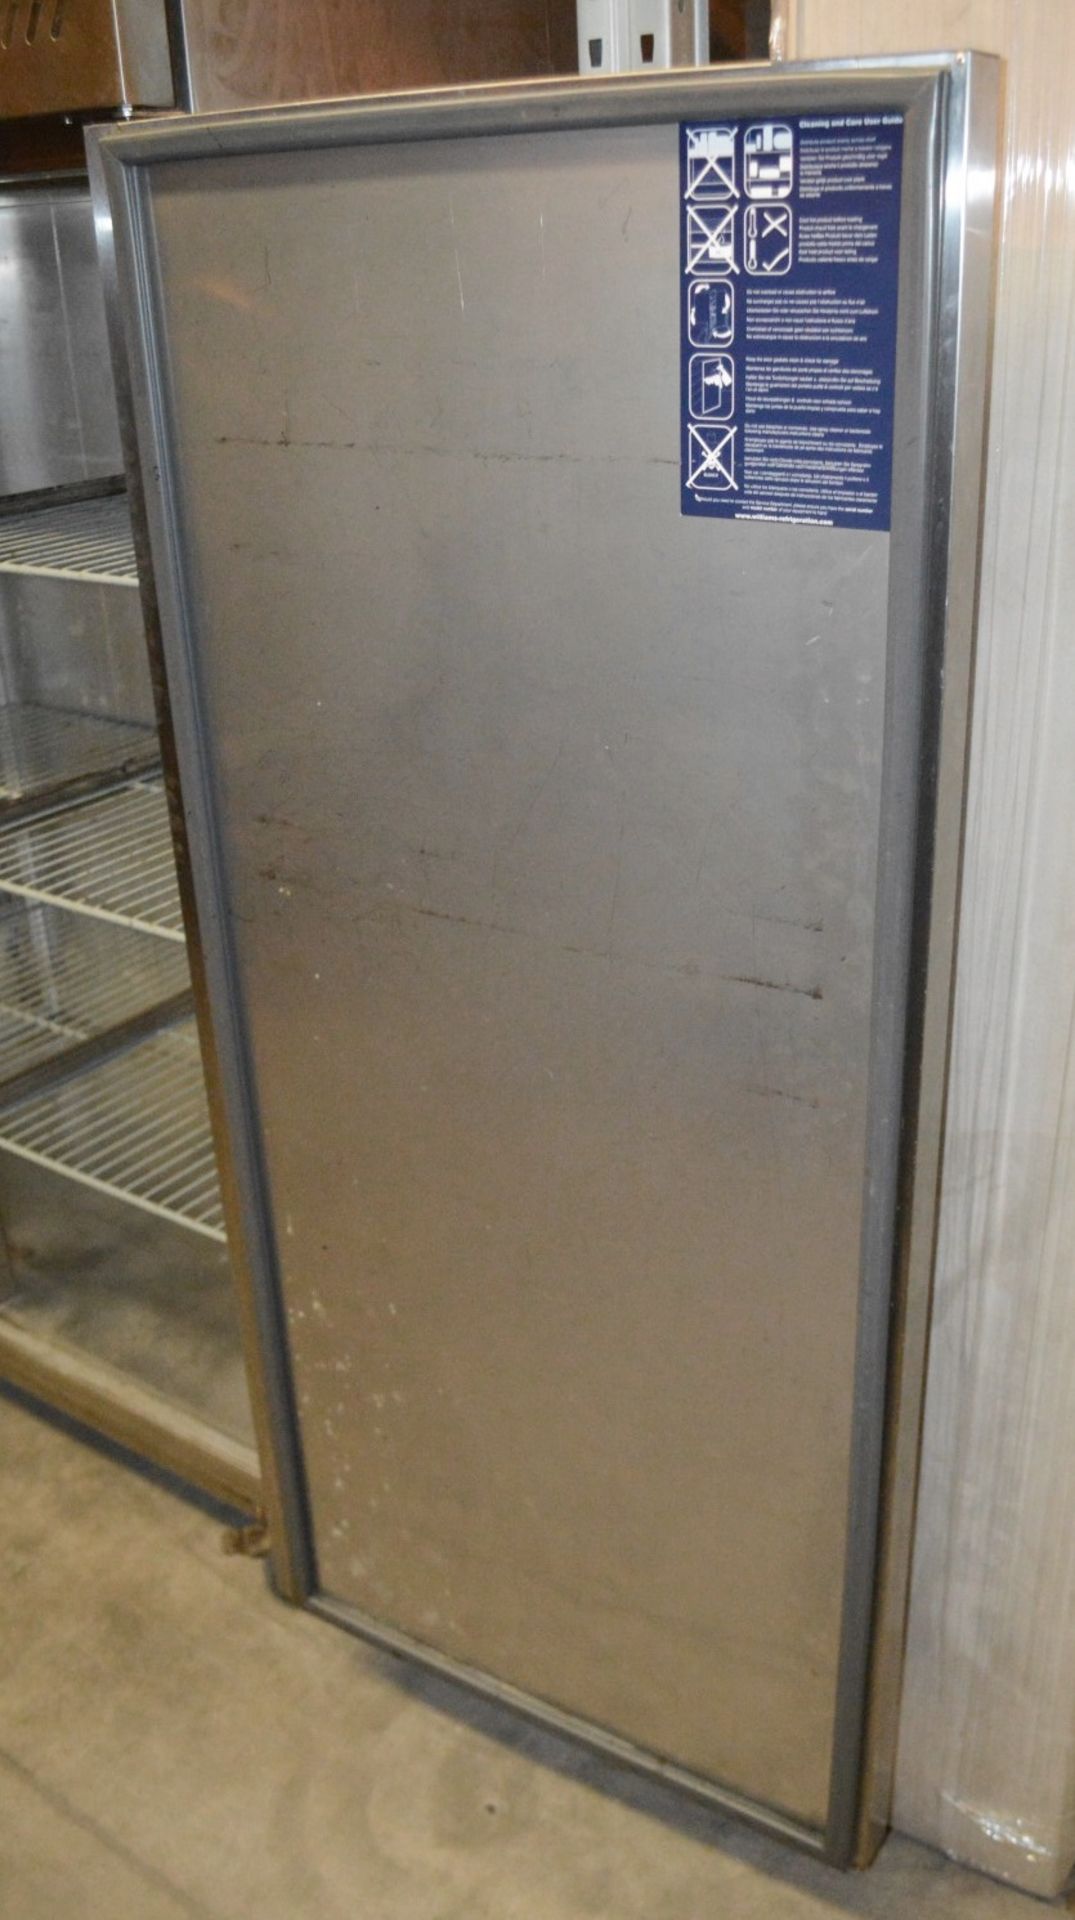 1 x WILLIAMS Upright 2-Door Stainless Steel Commercial Chiller Unit - Dimensions: H195 x W140 x - Image 8 of 12